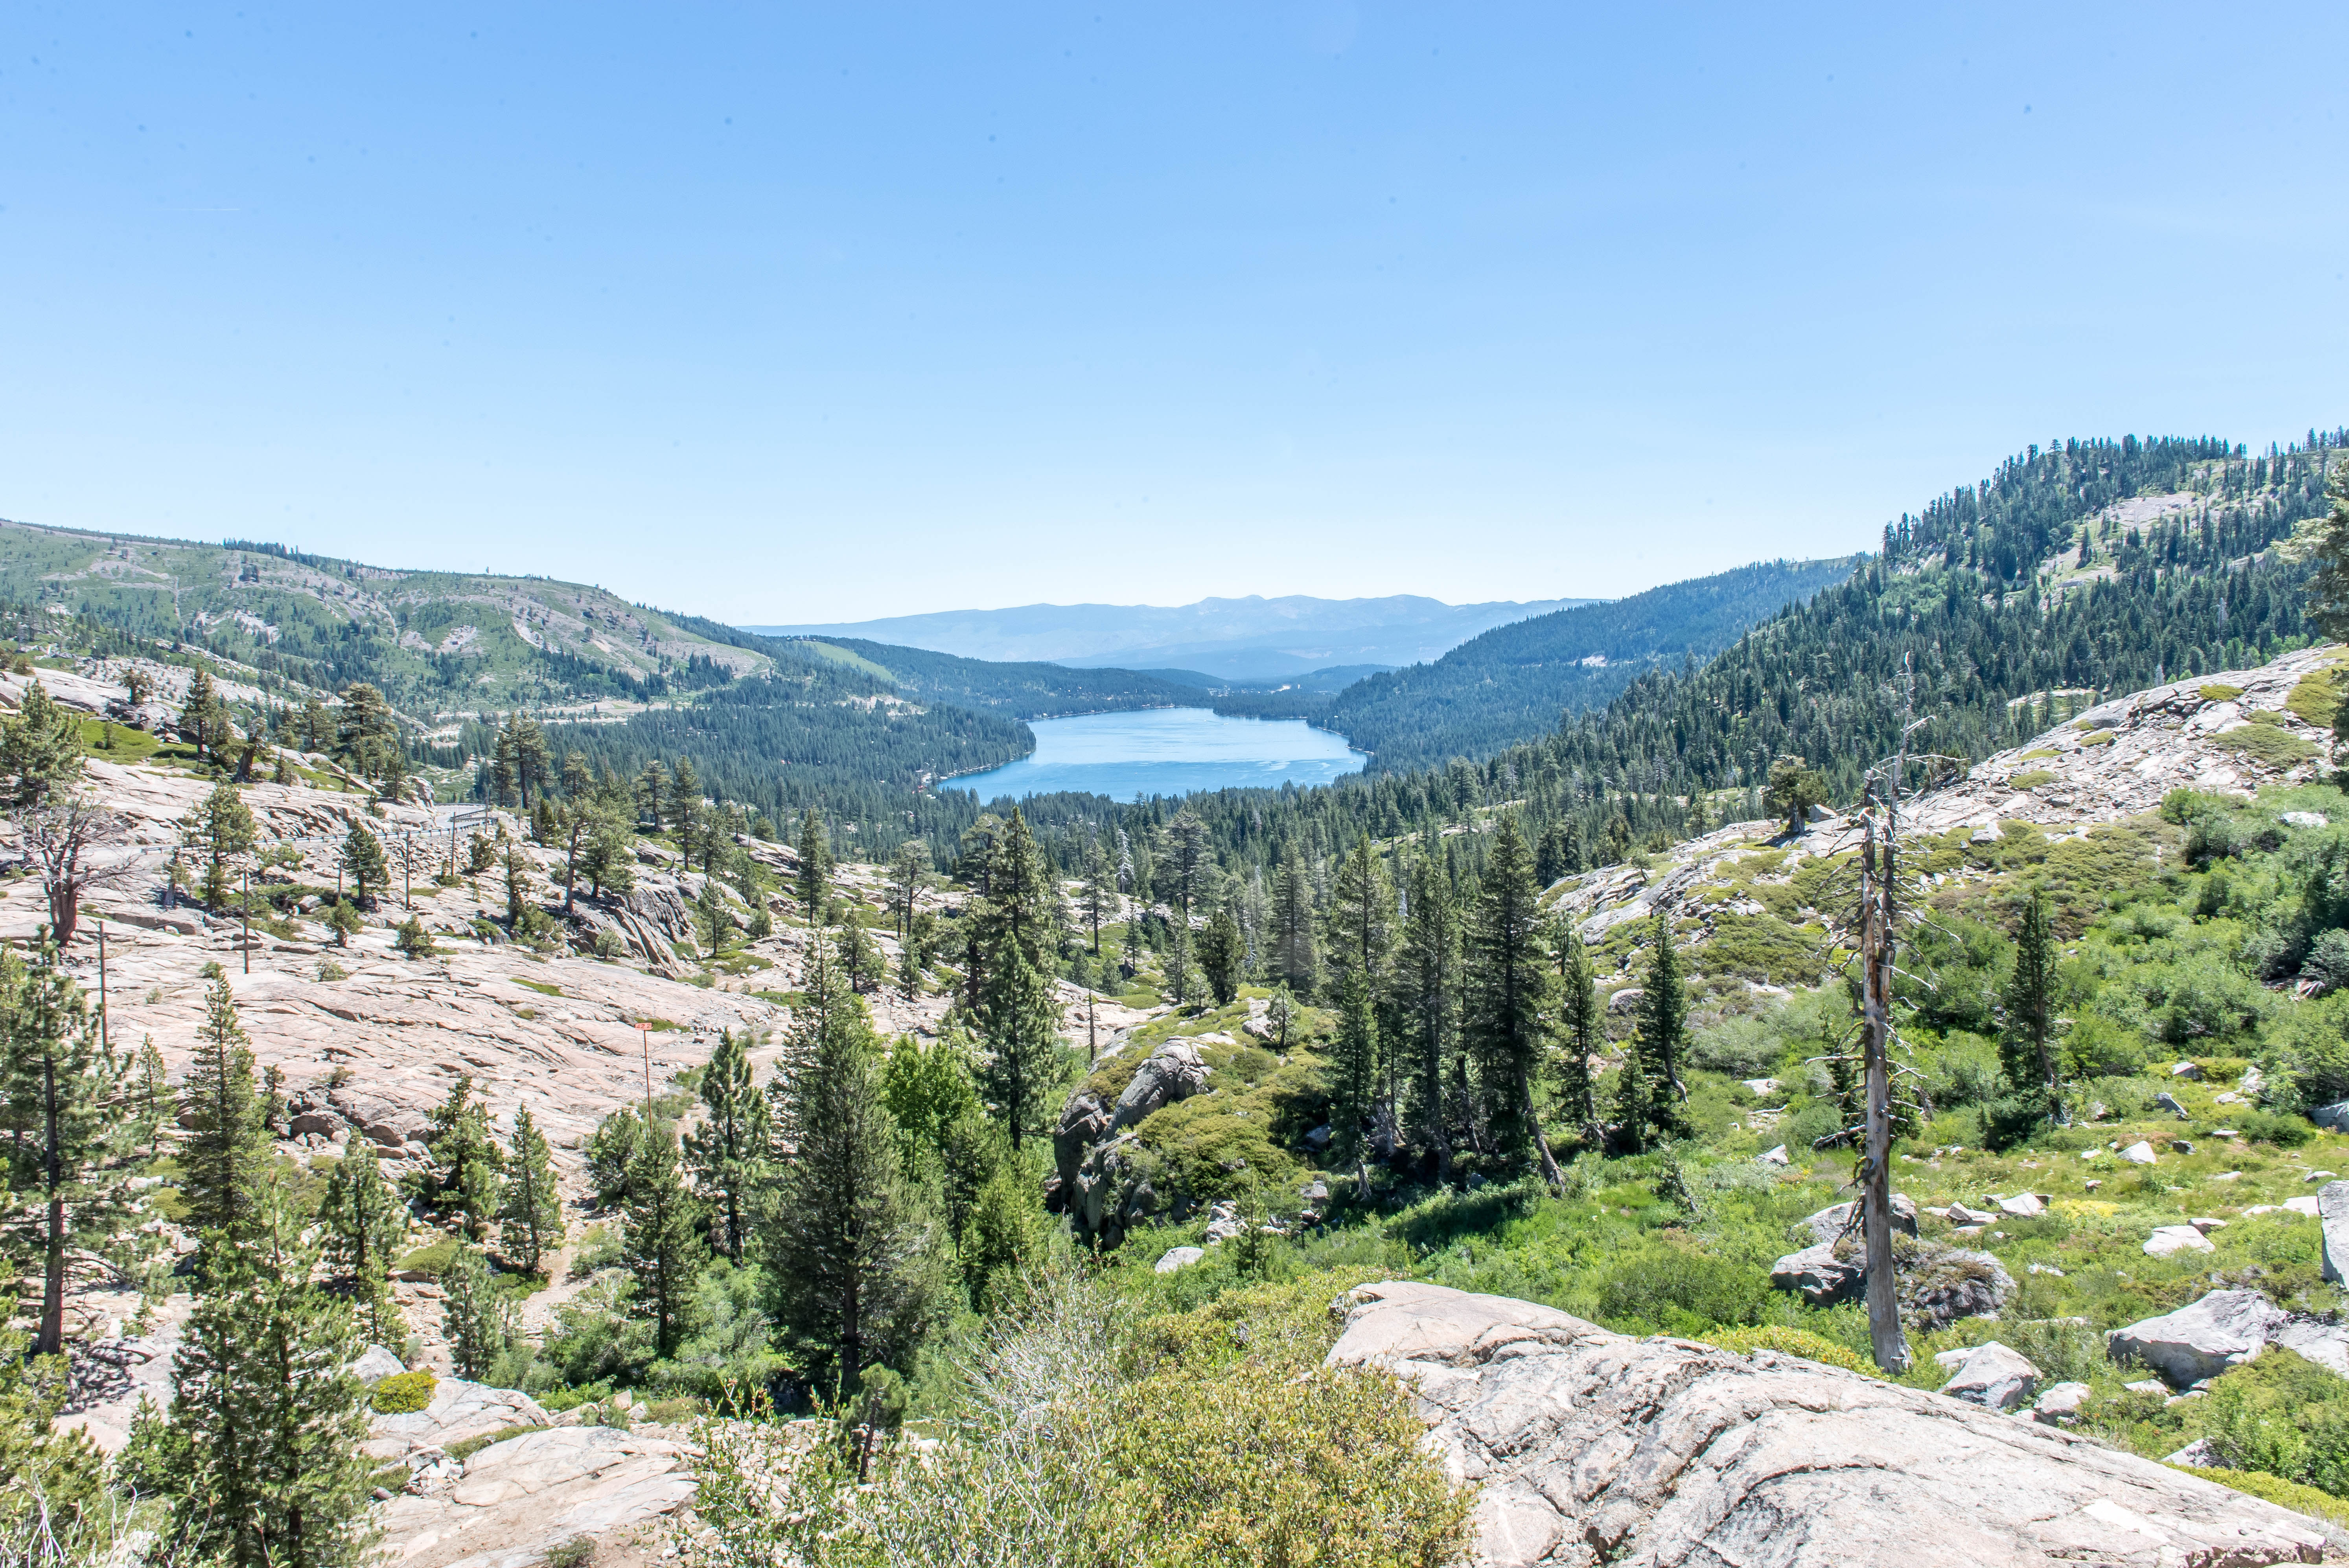 One of my field sites in the Sierra Nevadas, Donner Pass